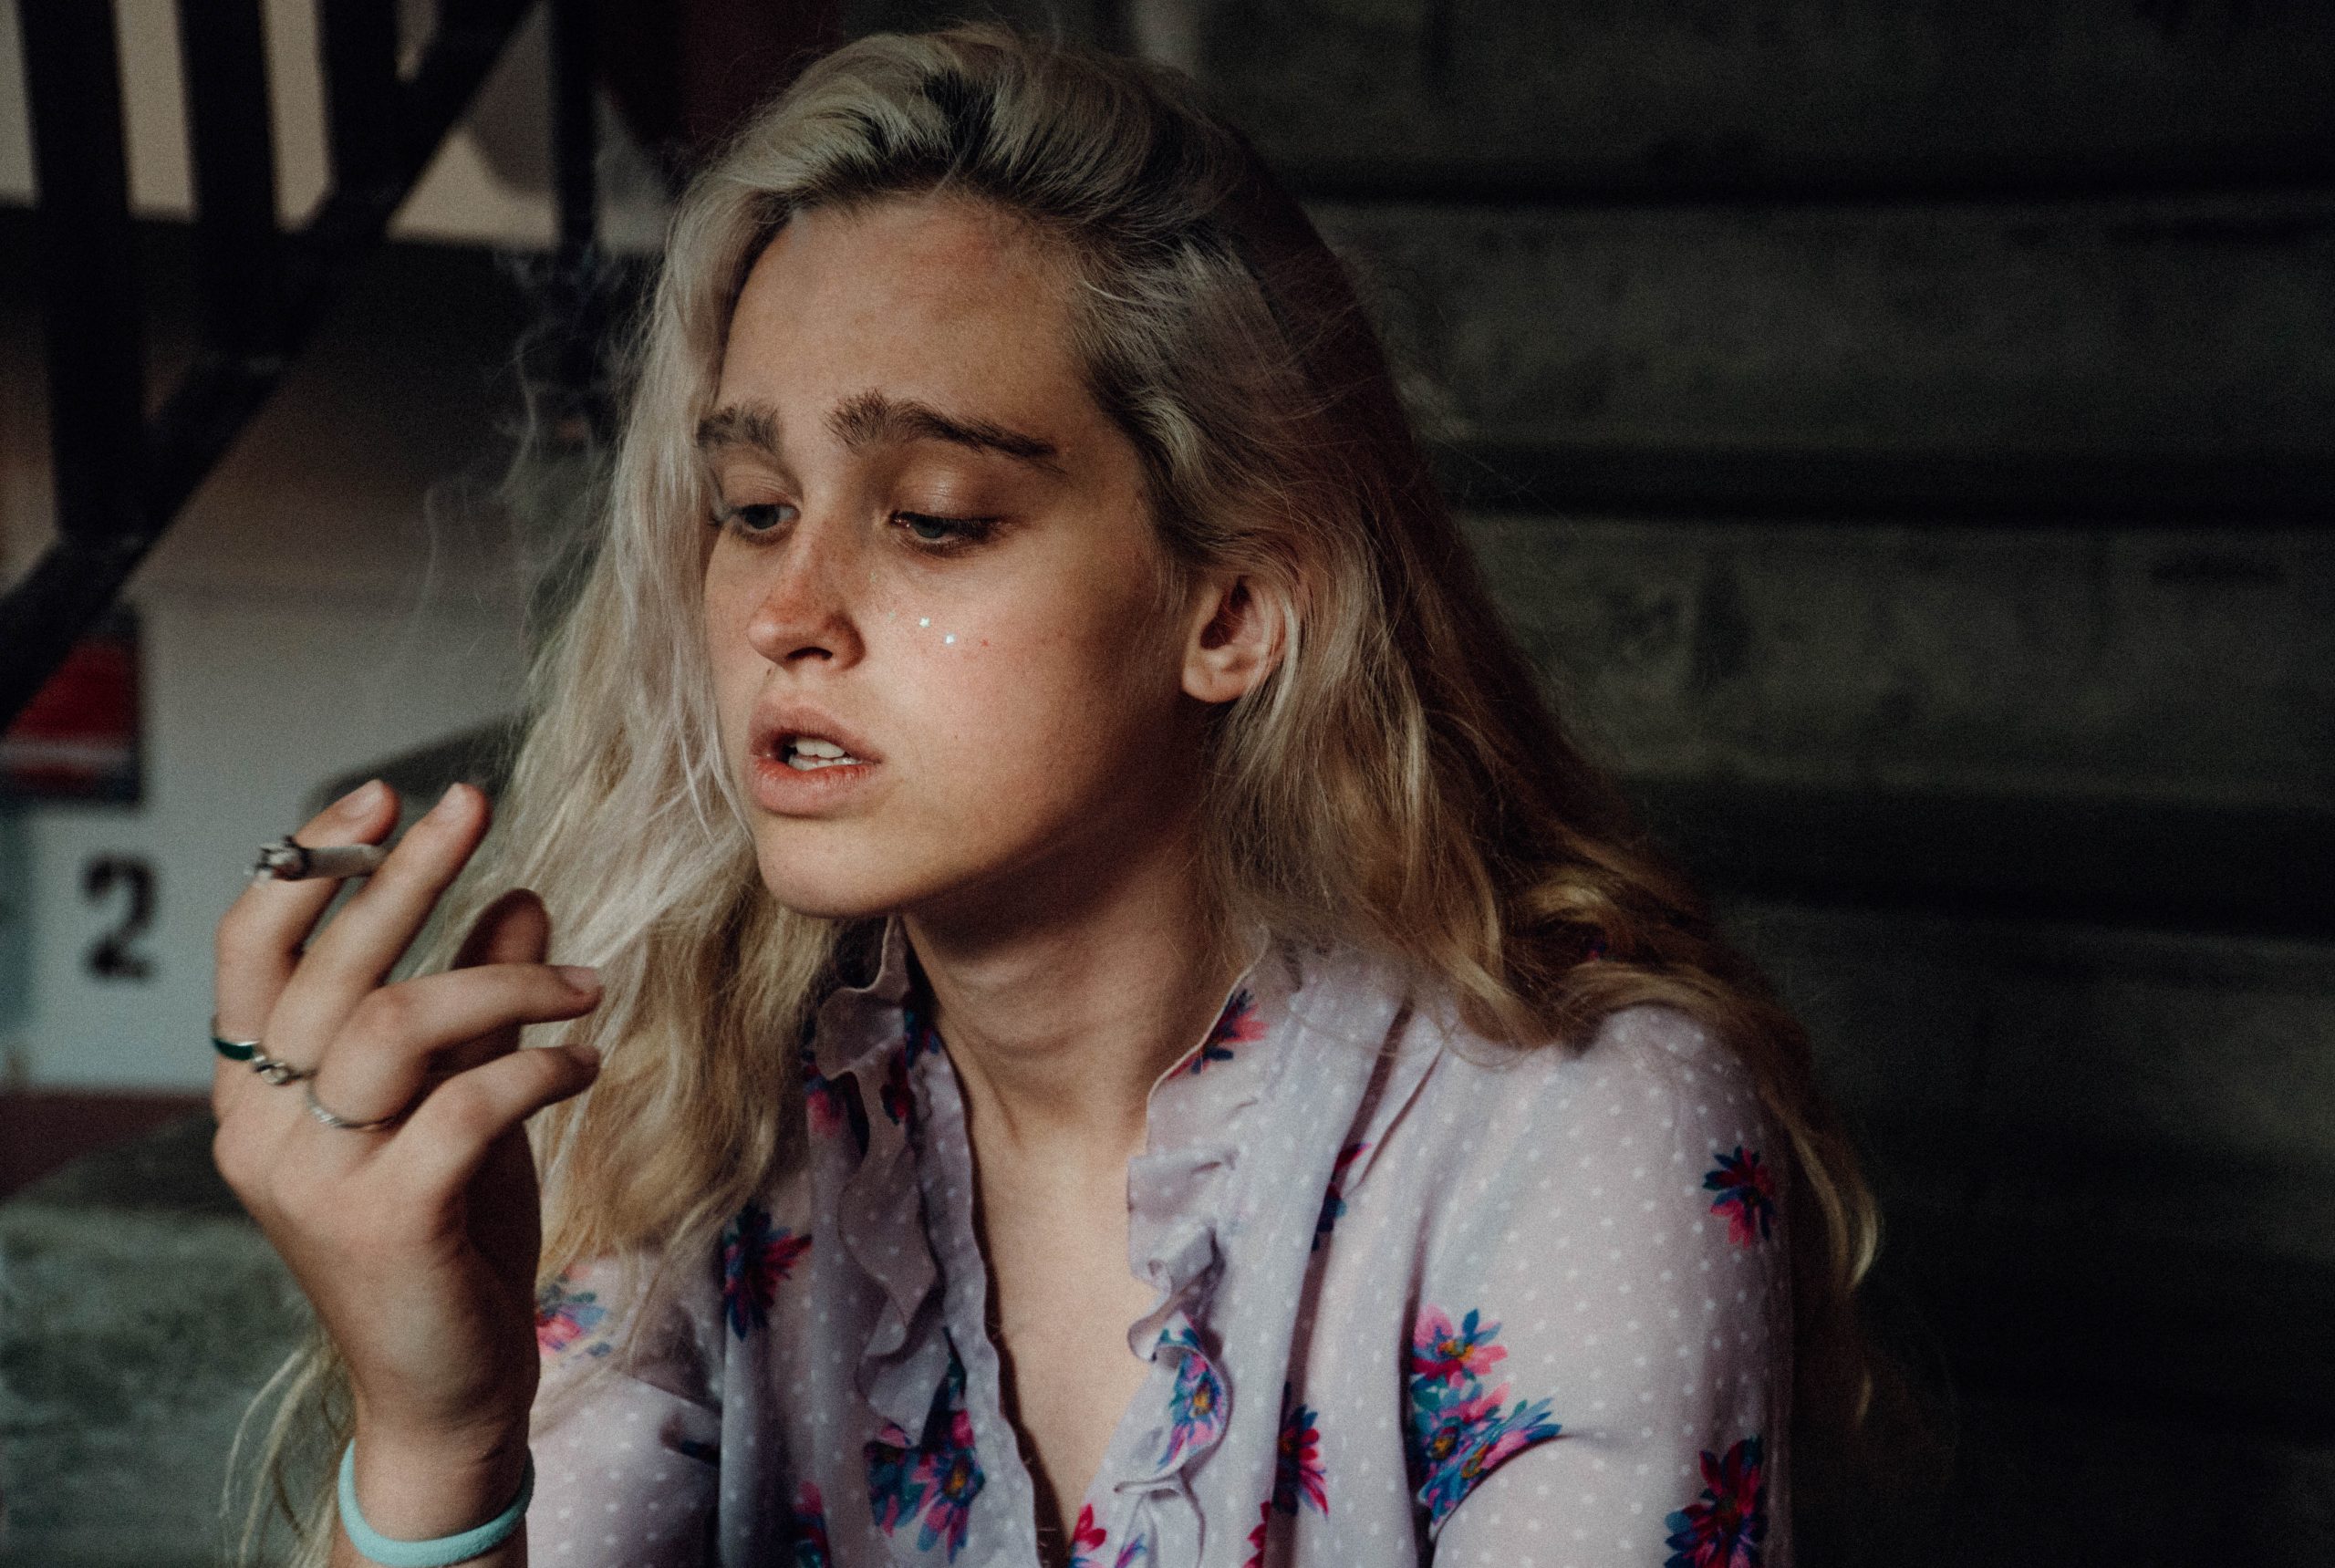 How Smoking Affects Your Self-Esteem and What To Do About It